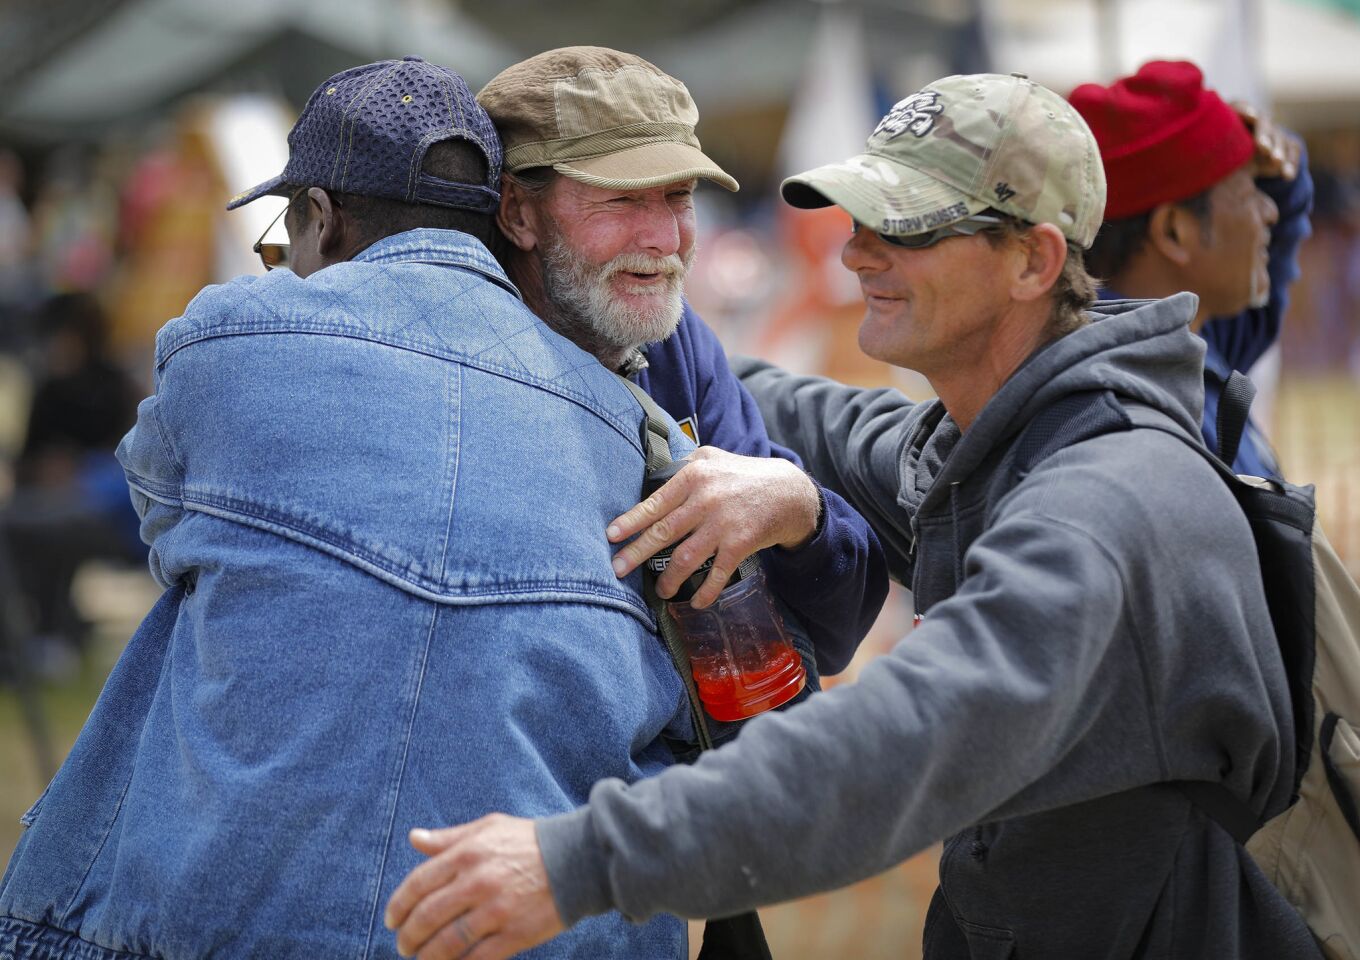 Navy veteran Sean Reilly, center, who has been homeless off and on over the past 15-years gets a hug from from friends during Stand Down 2018 at San Diego High School. The annual three-day event hosted by Veterans Village of San Diego began Friday and will help 800 veterans and their family members with a wide variety of services.